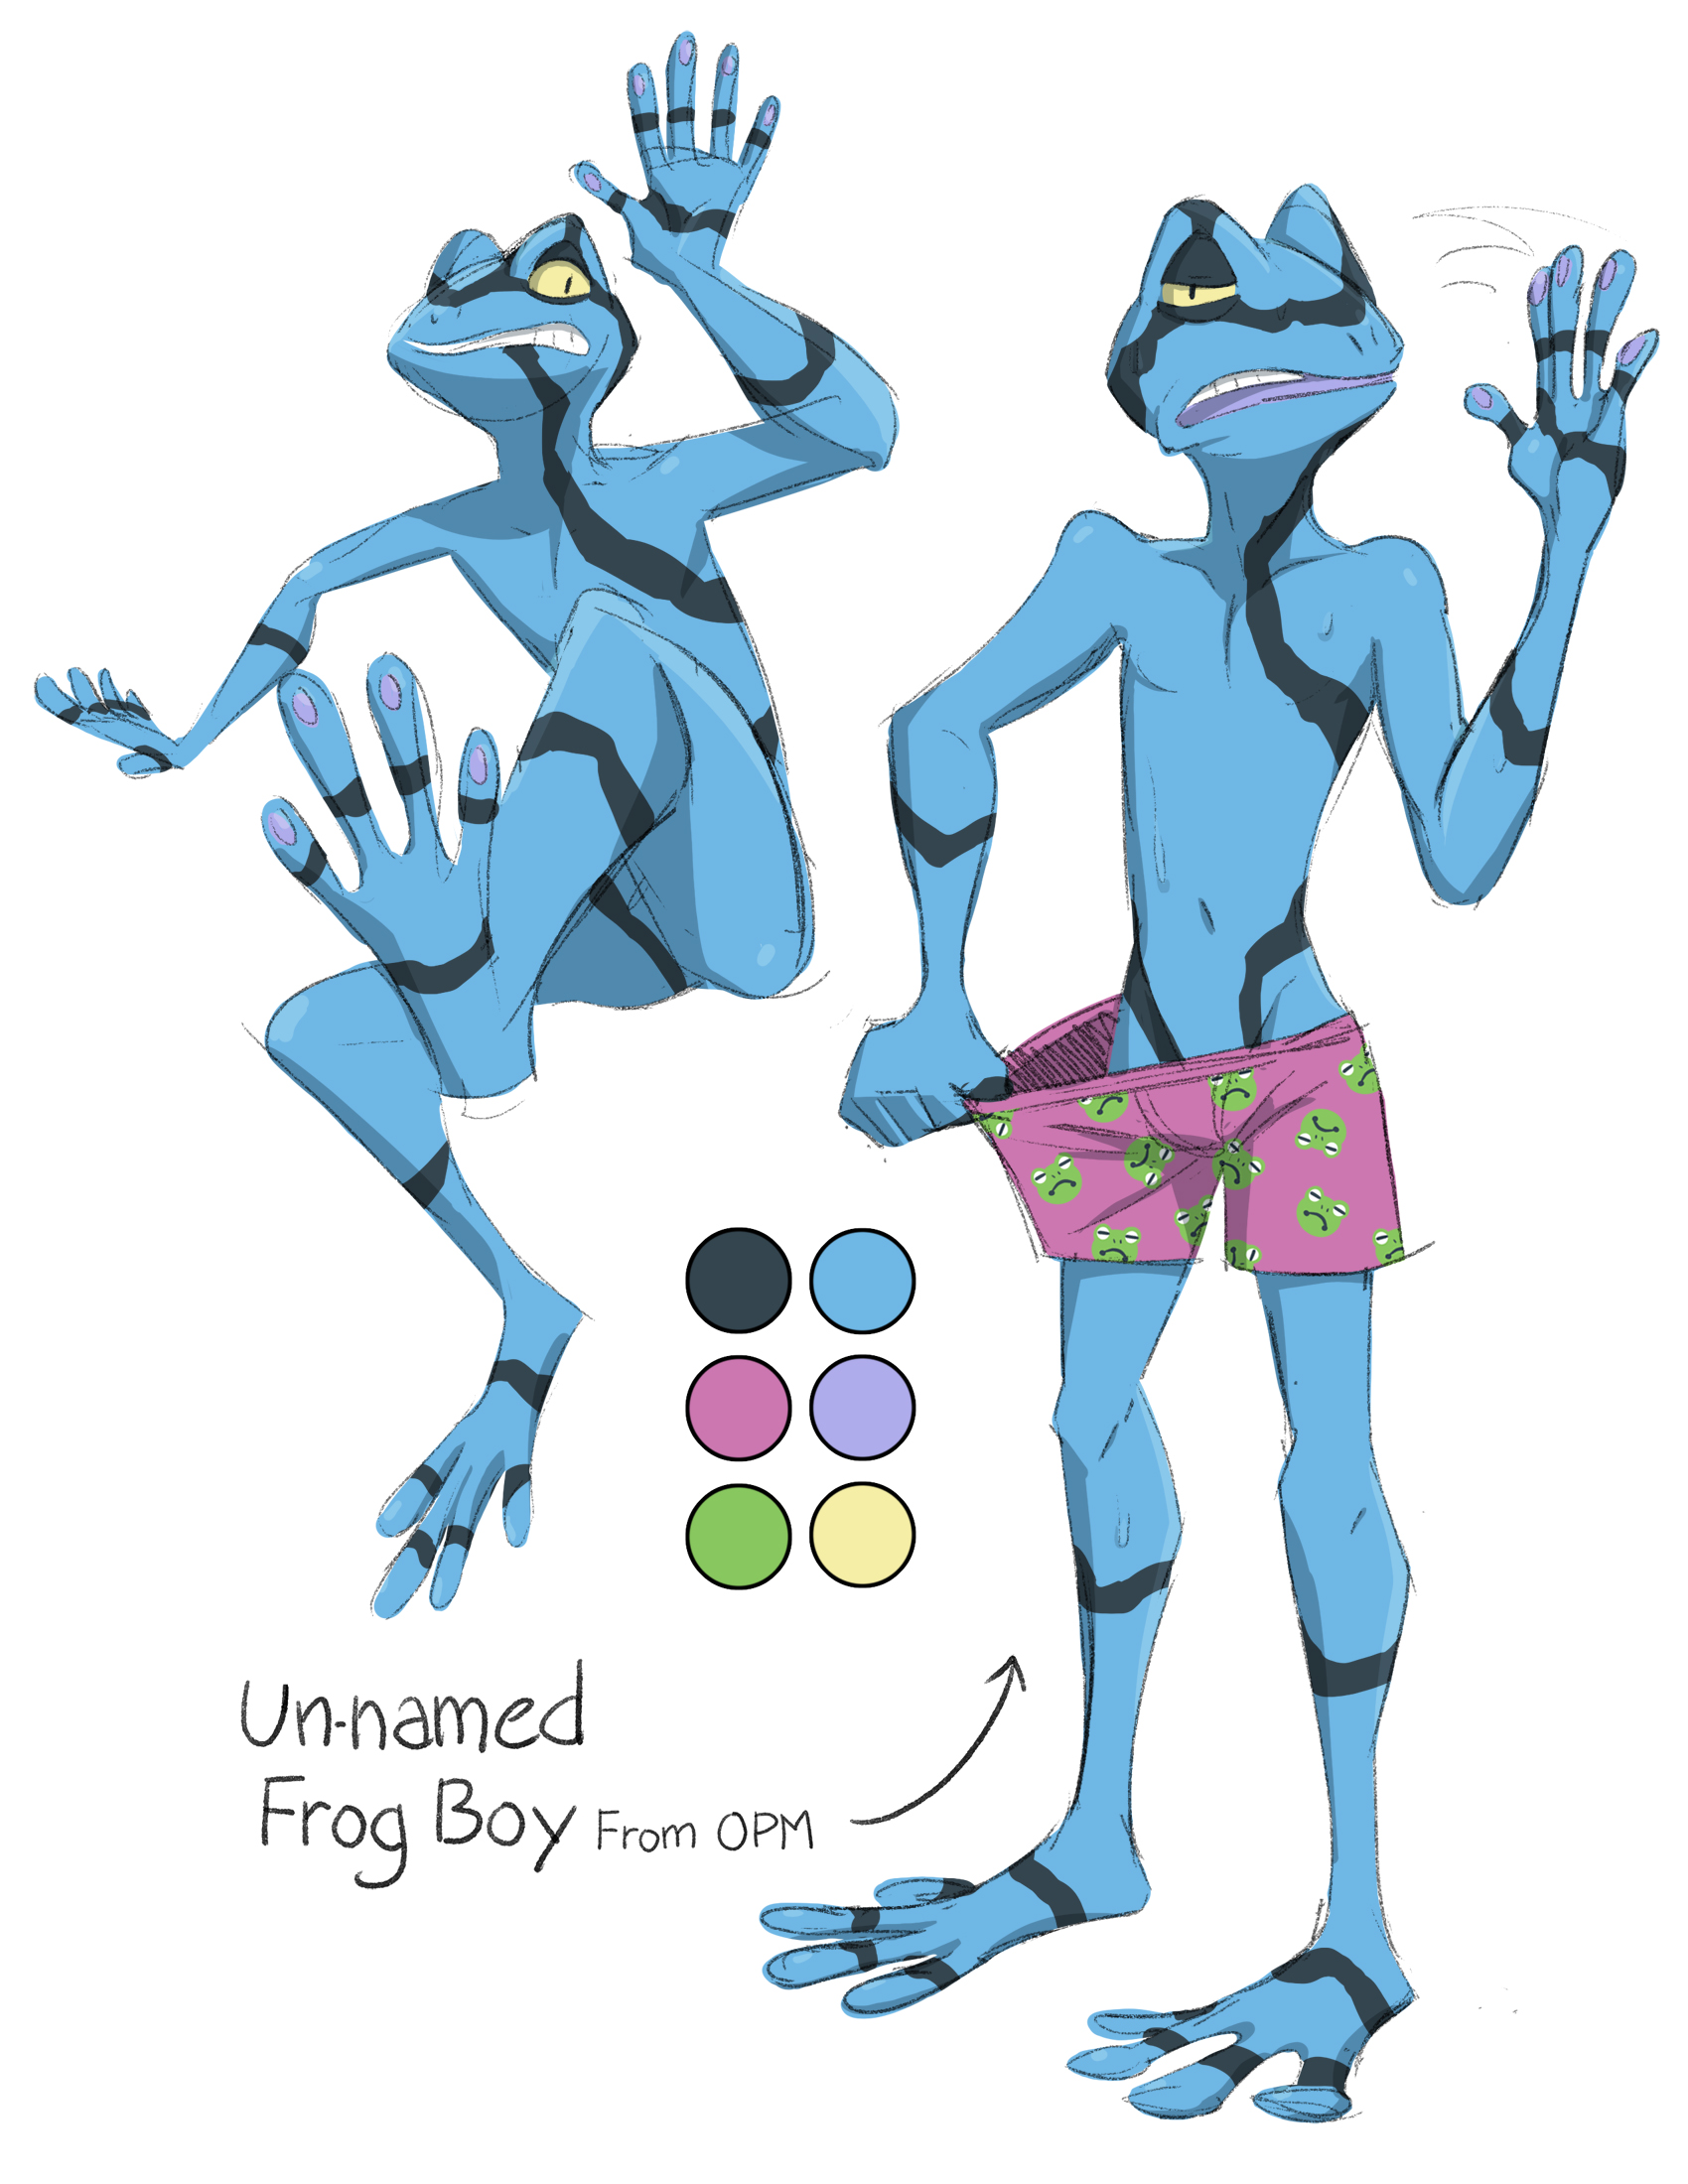 The Un-named Frog Boy. 